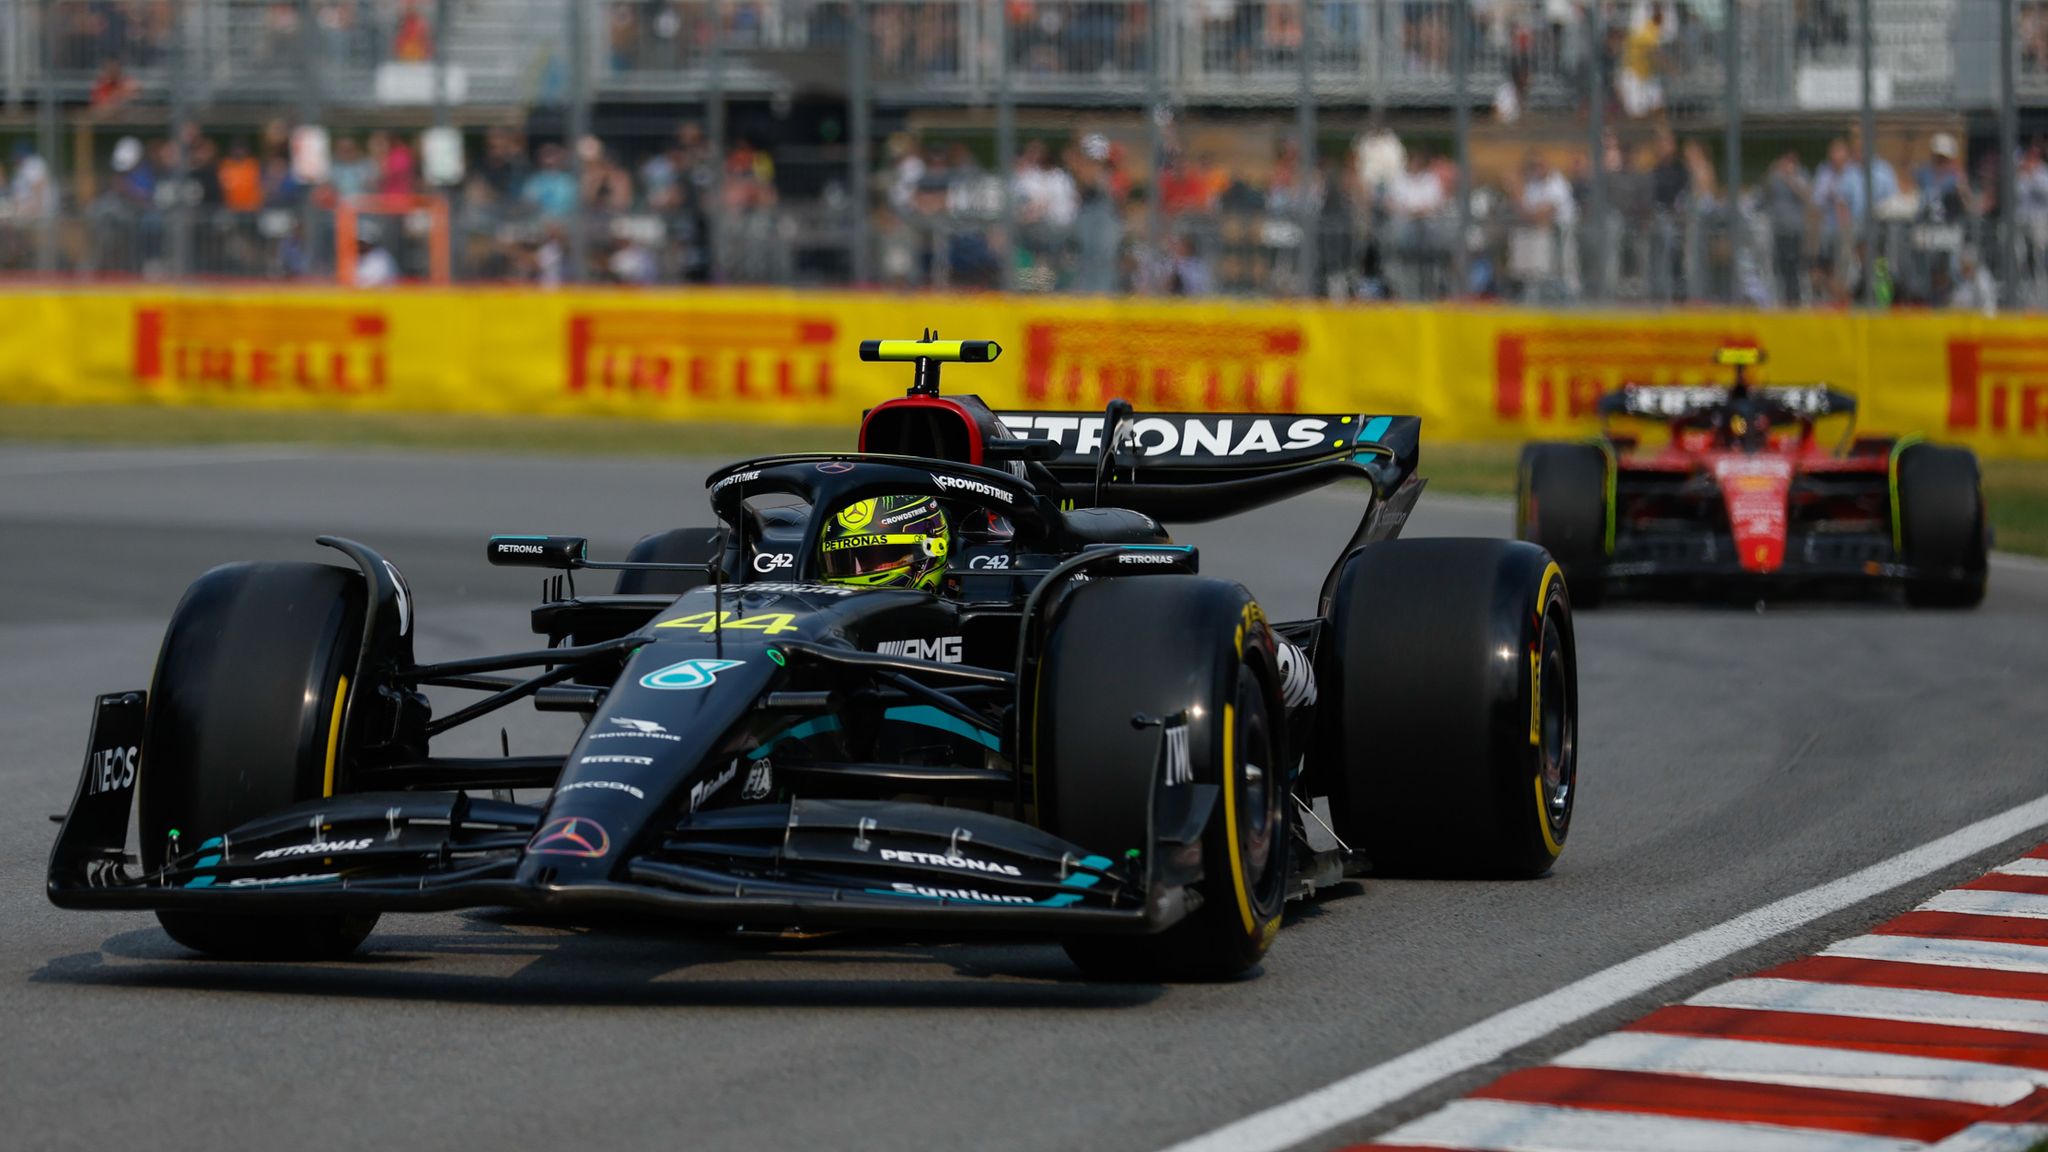 Canadian GP, Practice Two Lewis Hamilton leads George Russell as Mercedes claim one-two ahead of Carlos Sainz F1 News